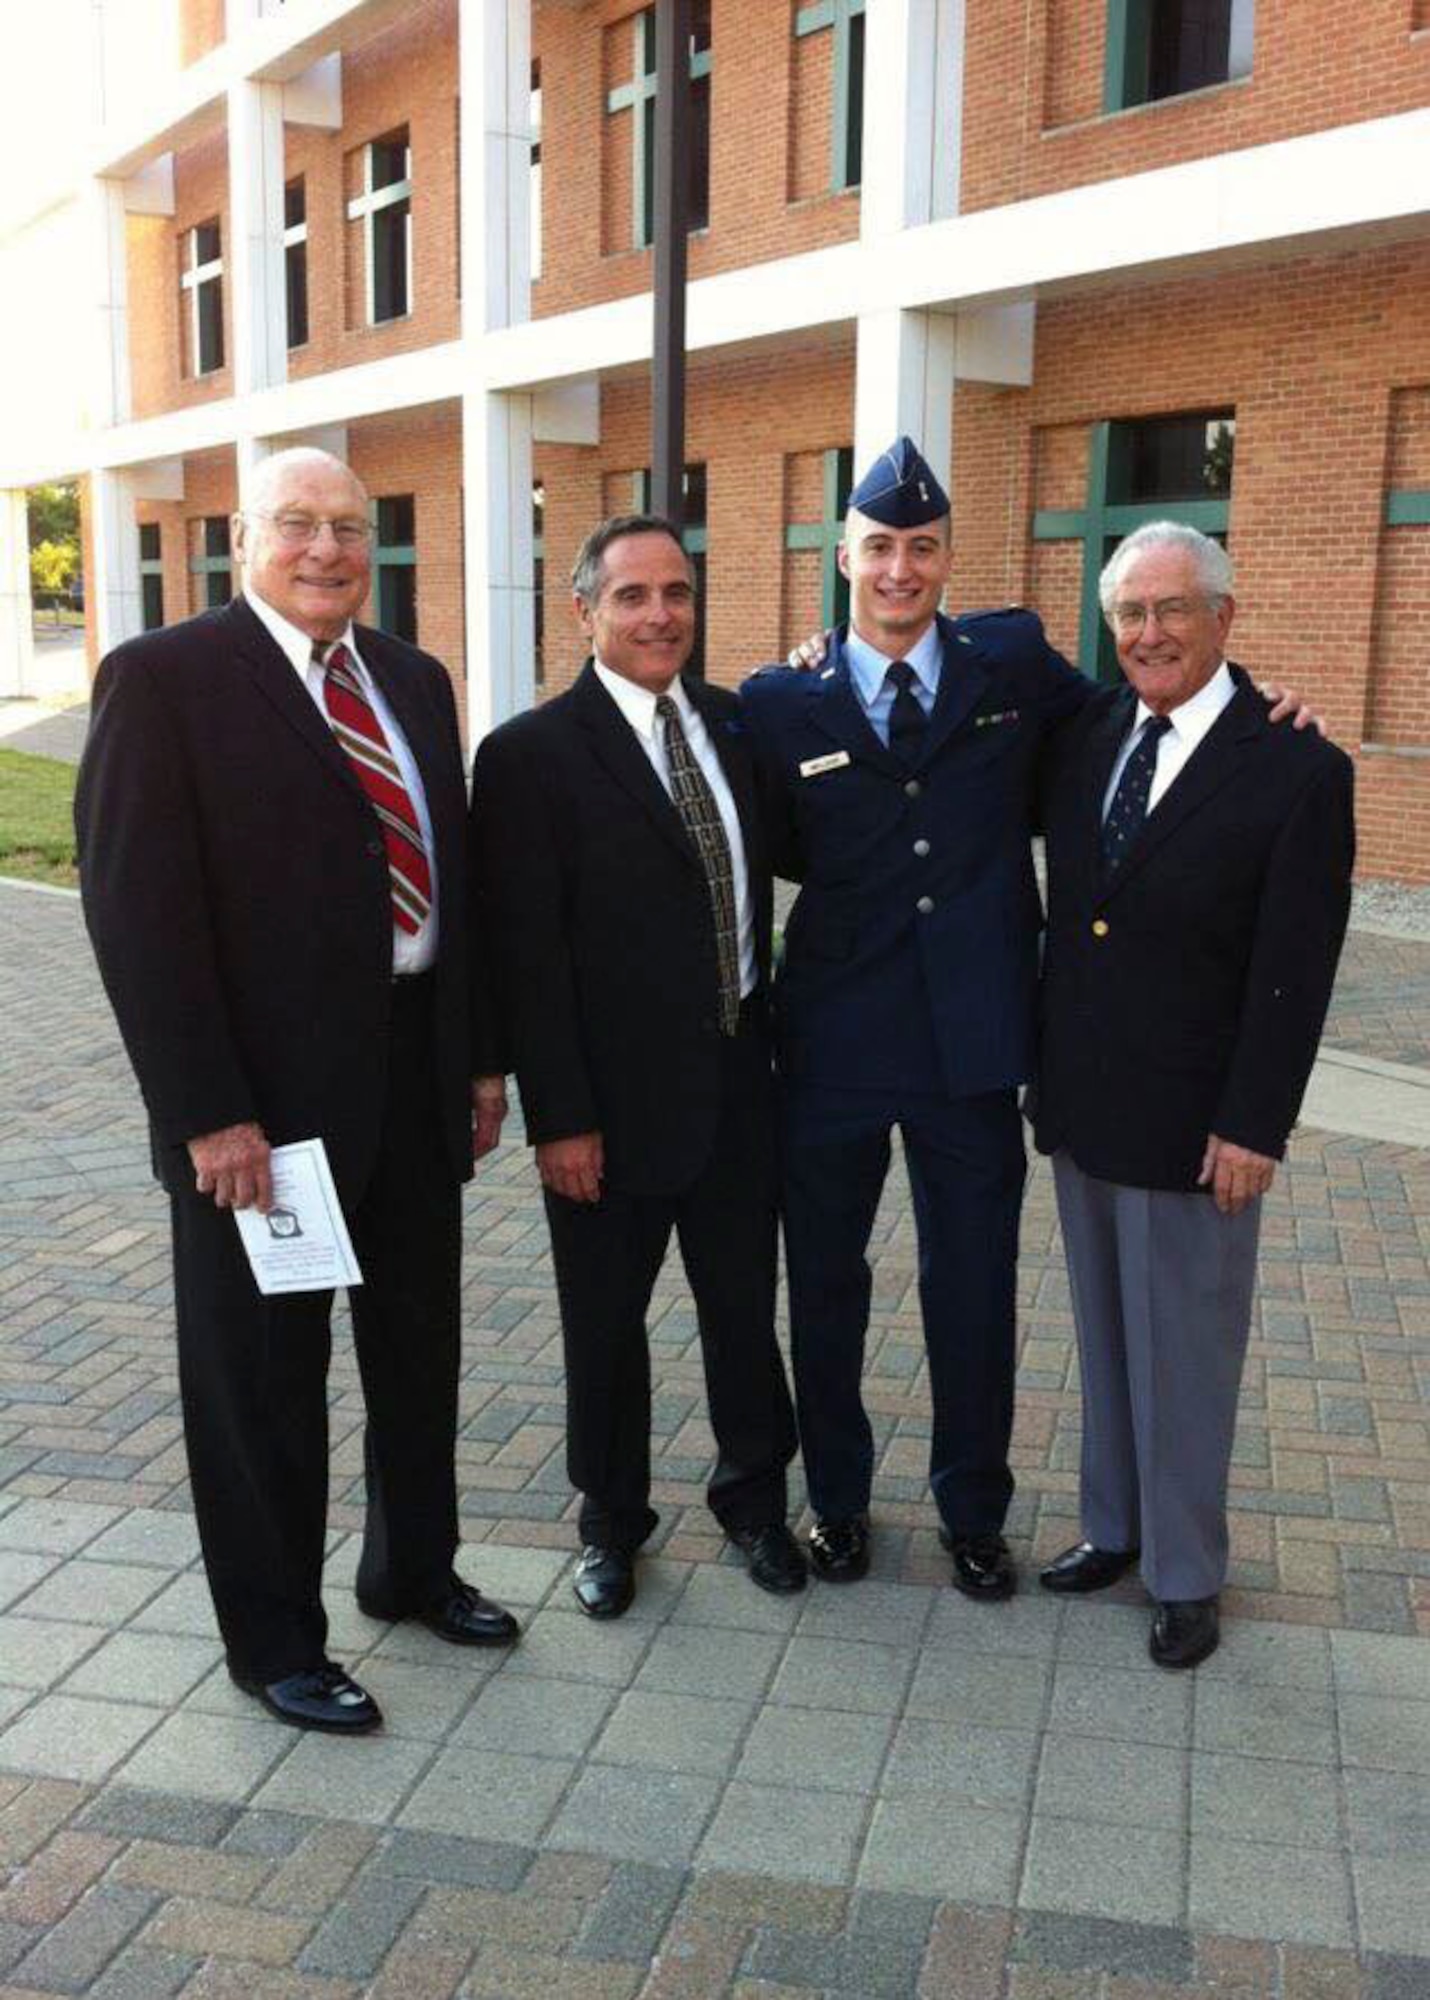 U.S. Air Force Capt. Jacob “Primo” Impellizzeri, center right, the Pacific Air Forces F-16 Fighting Falcon Demonstration Team commander and pilot, pauses for a photo with retired U.S Air Force Col. George Rice, left, his maternal grandfather, and former U.S. Air Force Capt. Ken Impellizzeri, center, his father, and former Cpl. U.S. Army Air Corps Donald Impellizzeri, right, his paternal grandfather, right, after his commissioning ceremony at Wright State University in Dayton, Ohio, June 8, 2012. Post high school graduation Impellizzeri attended the Reserve Officers’ Training Corps program resulting in a continued family legacy of service. (Courtesy photo)